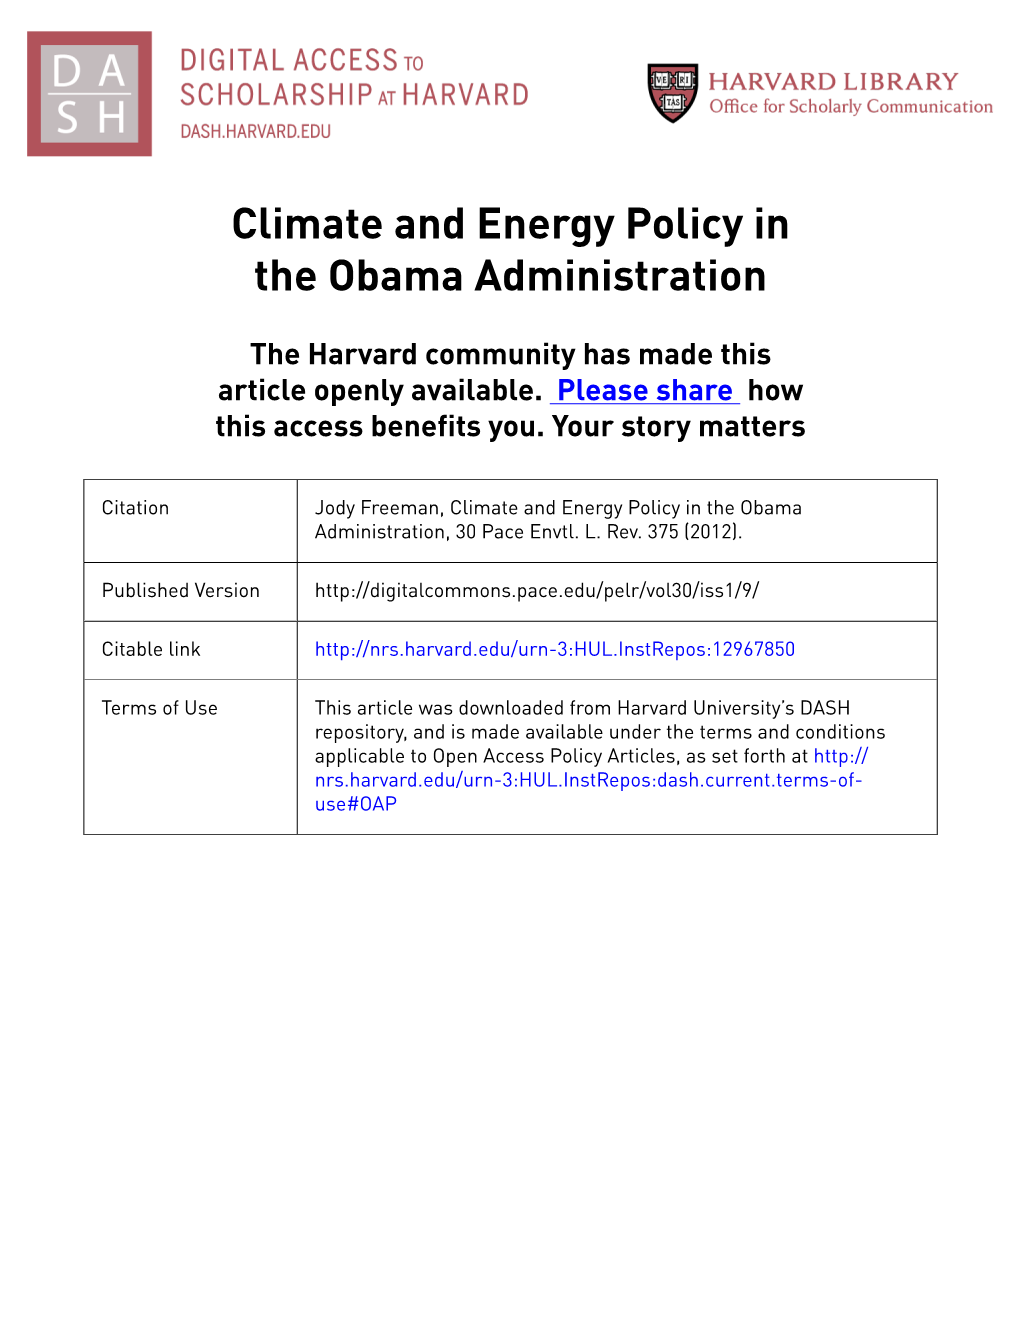 Climate and Energy Policy in the Obama Administration